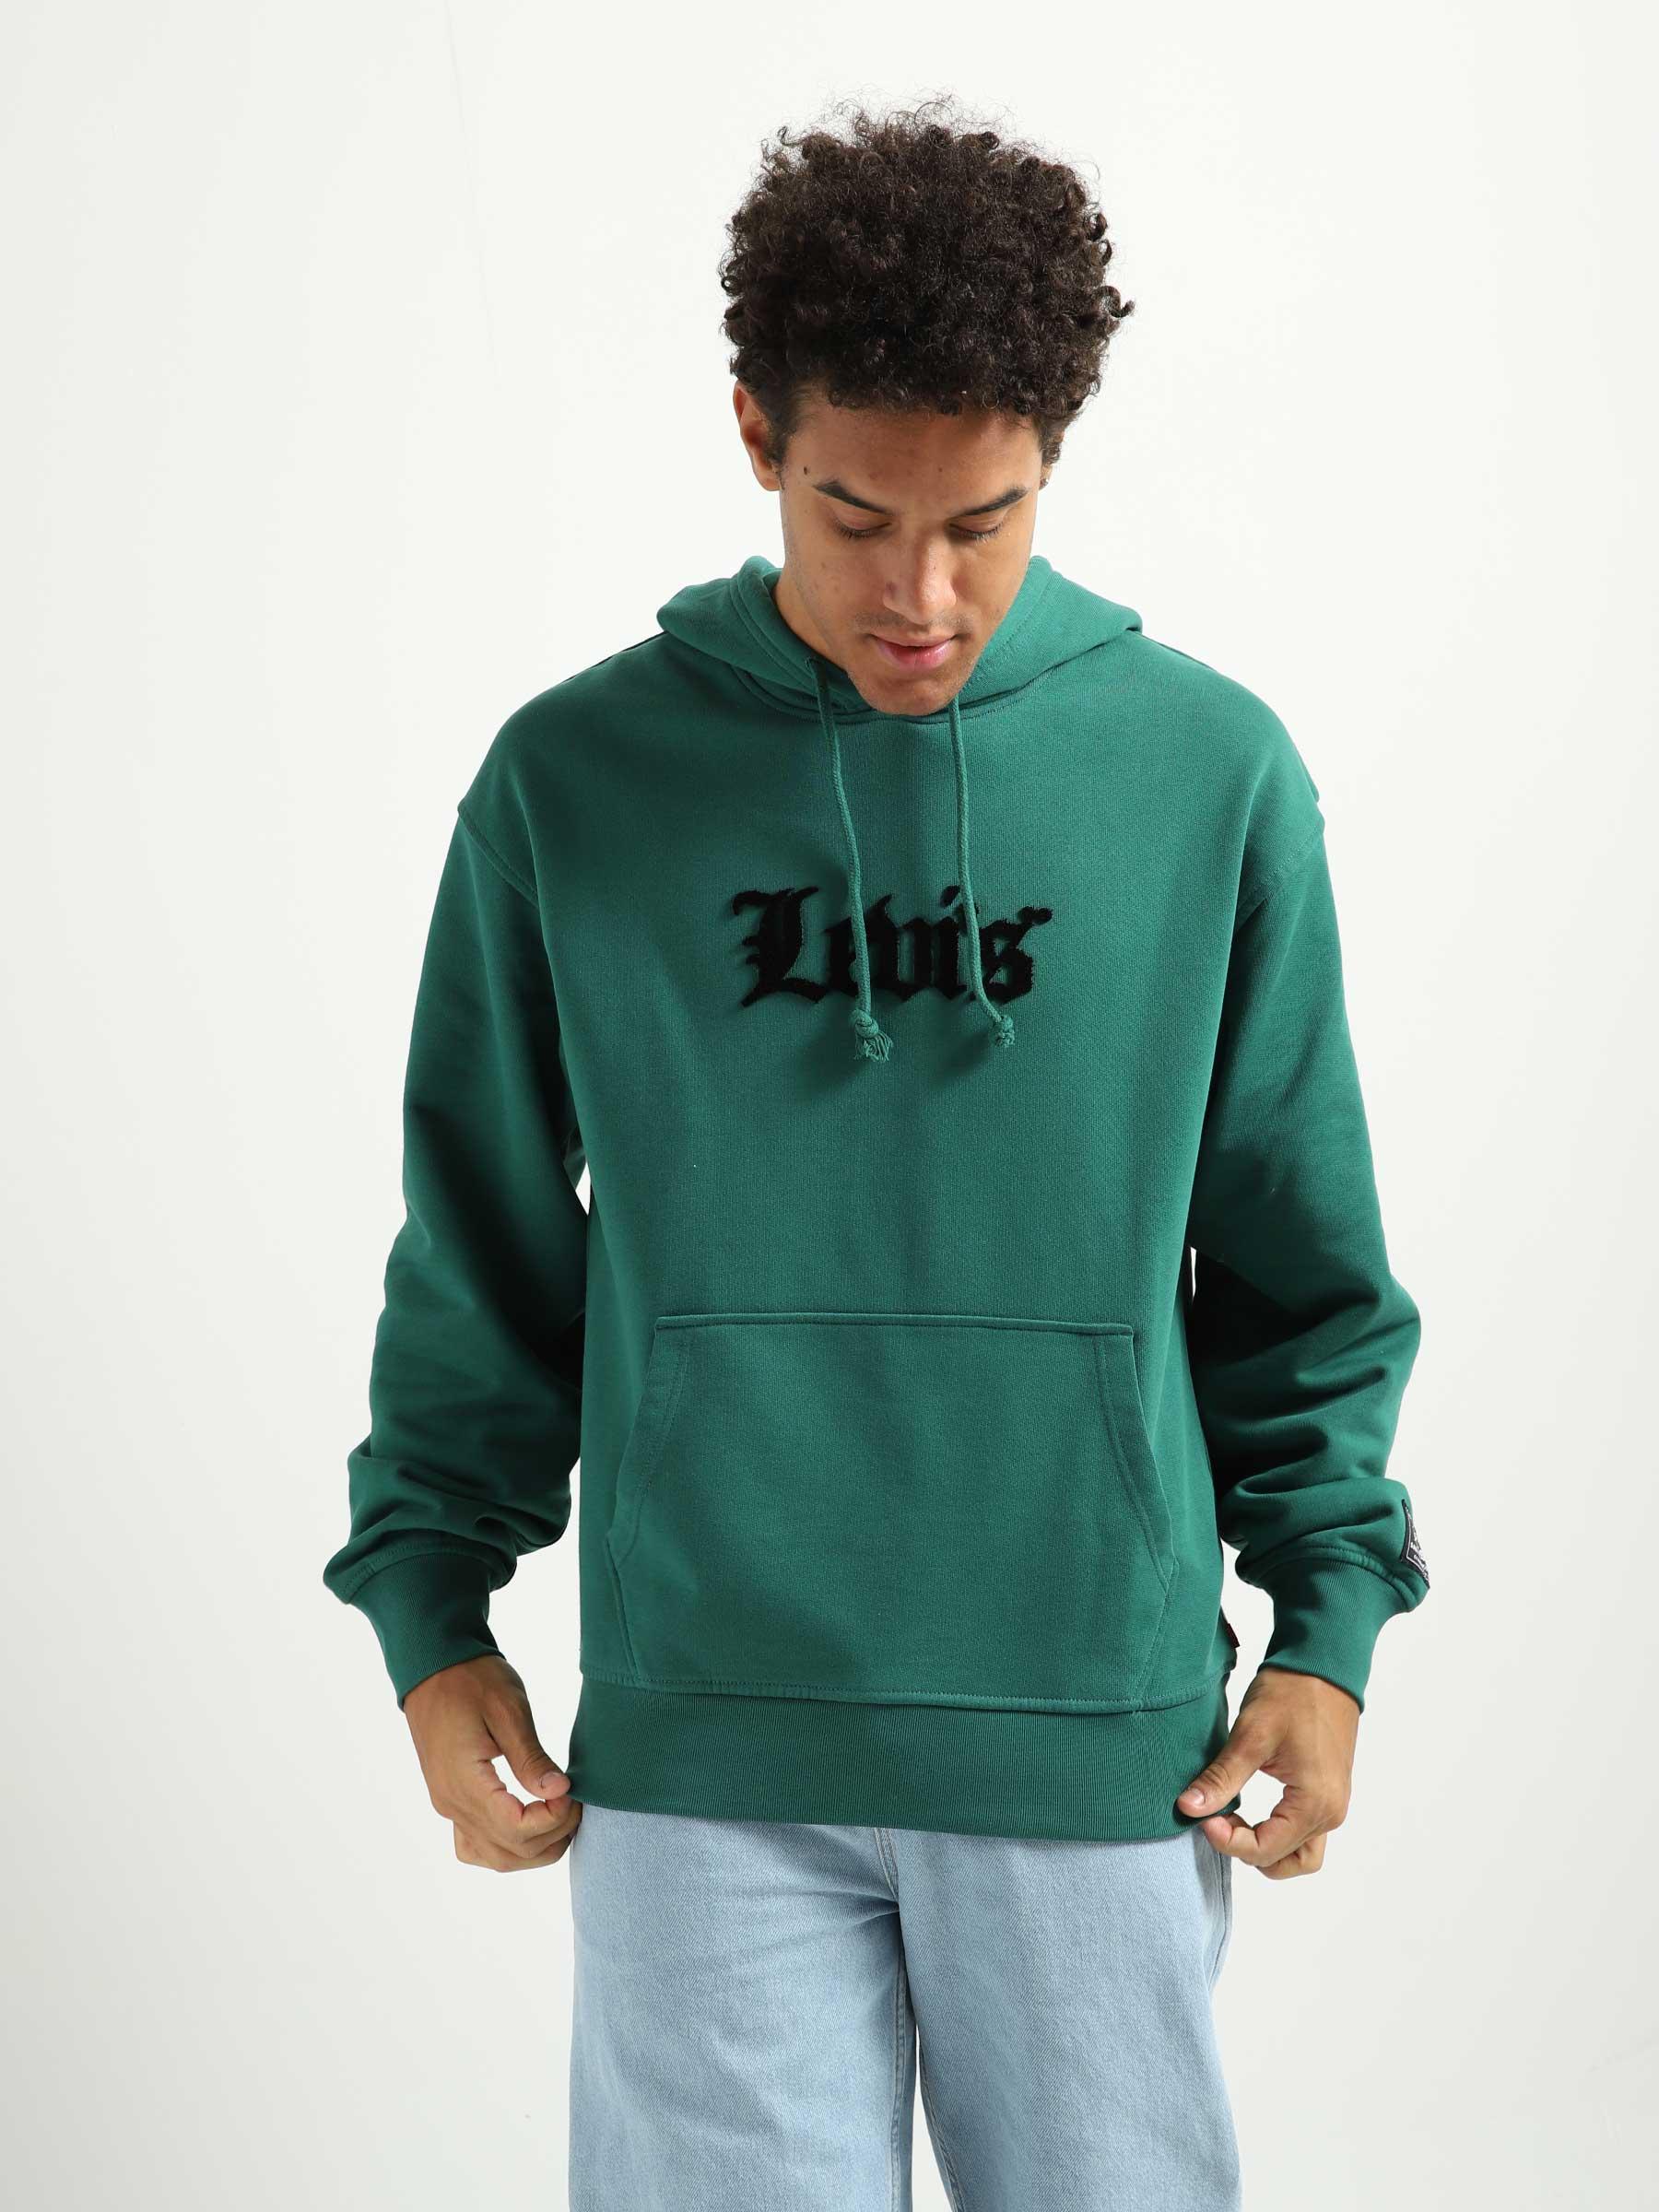 Levis Relaxed Graphic Hoodie Olde Englis - Freshcotton